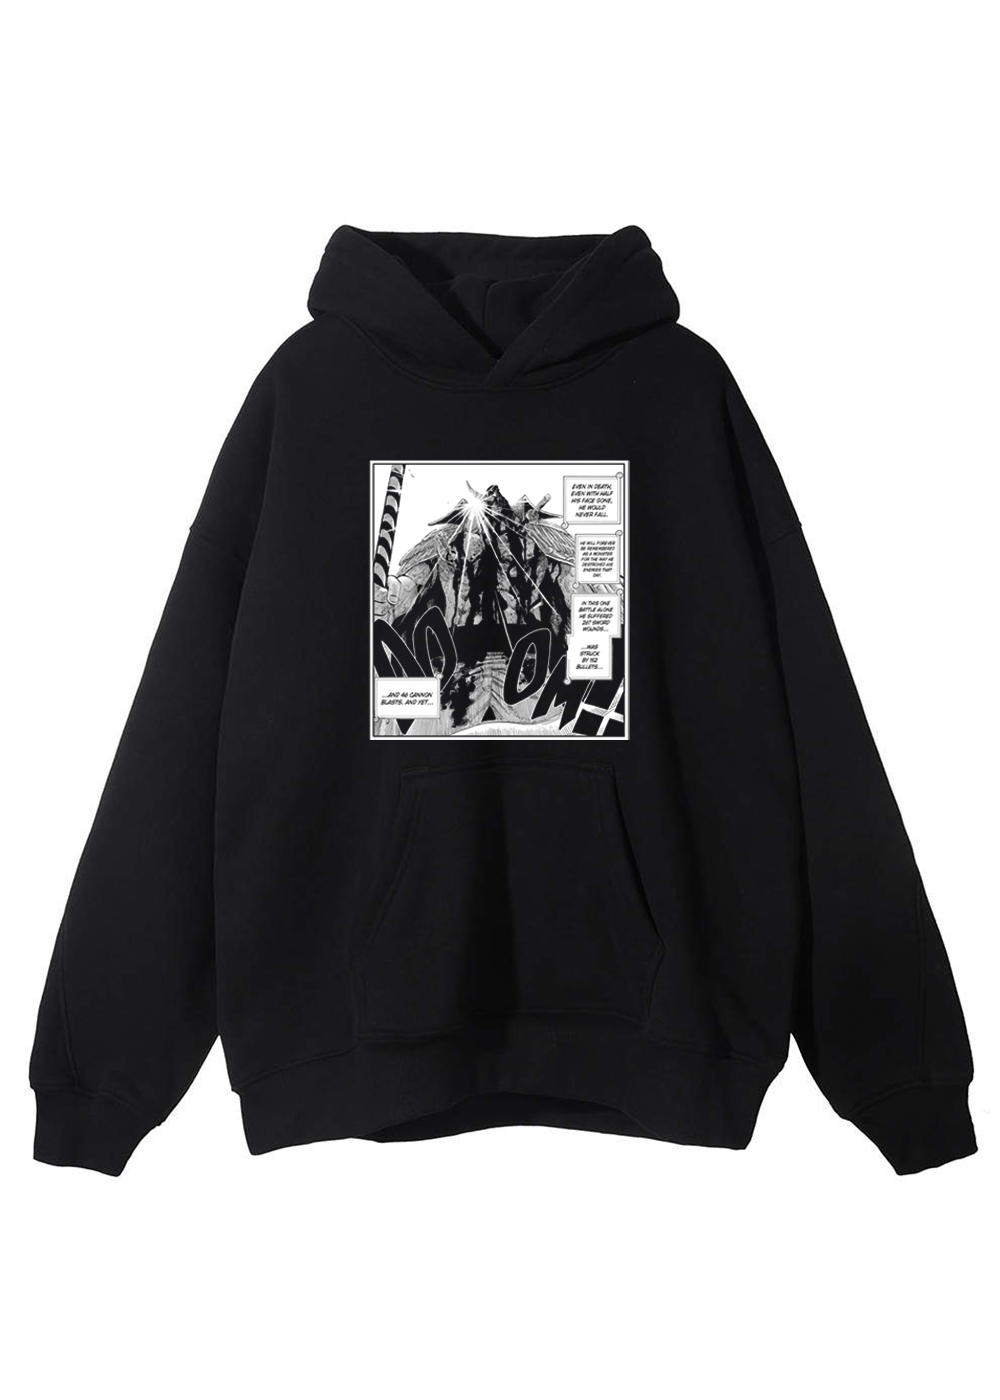 THE STRONGEST IN THE WORLD HOODIE